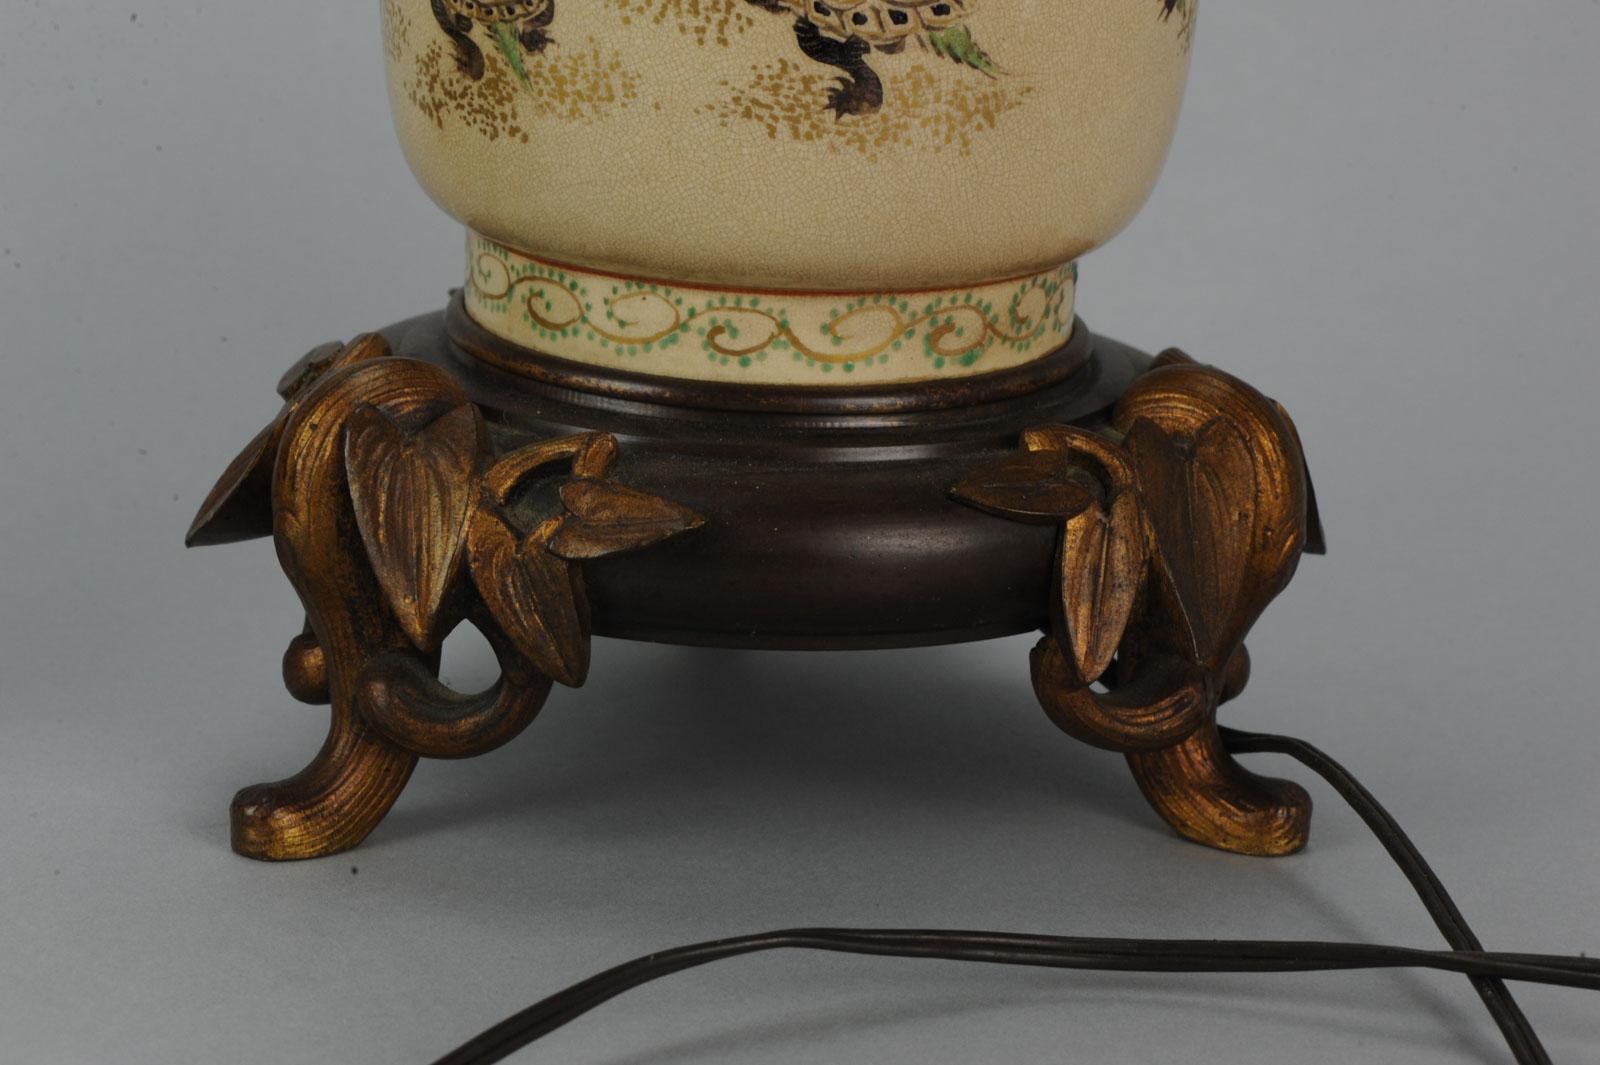 Lovely Antique Satsuma Lamp Vase Set with Cranes and Turtles, Japan 19th Century For Sale 2